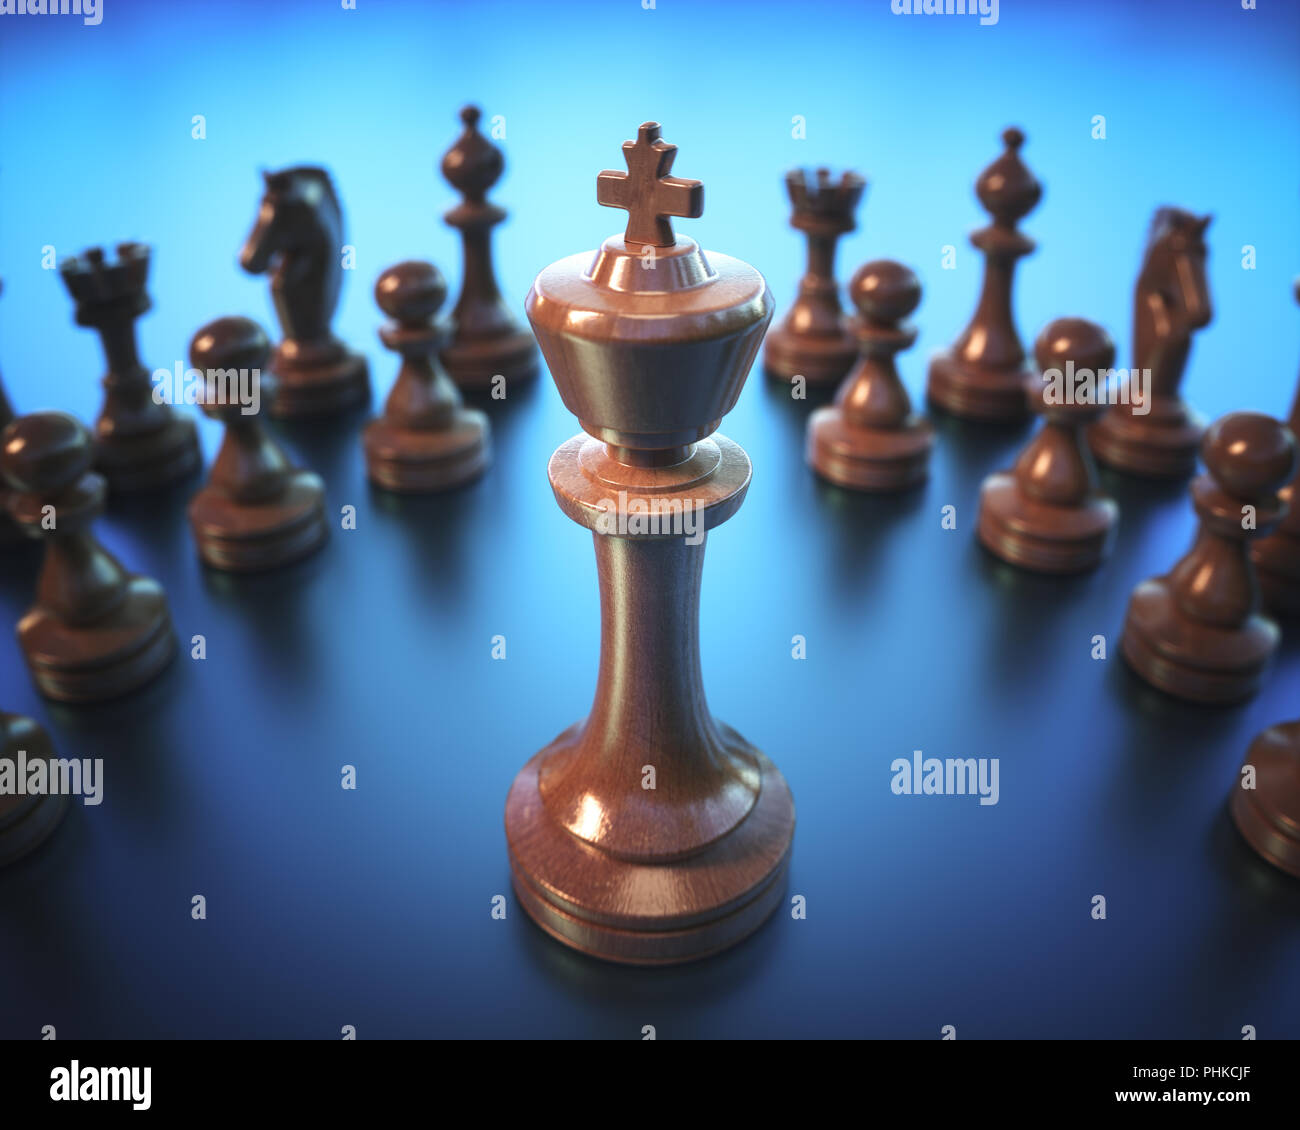 The King in highlight. Pieces of chess game, image with shallow depth of field. Stock Photo